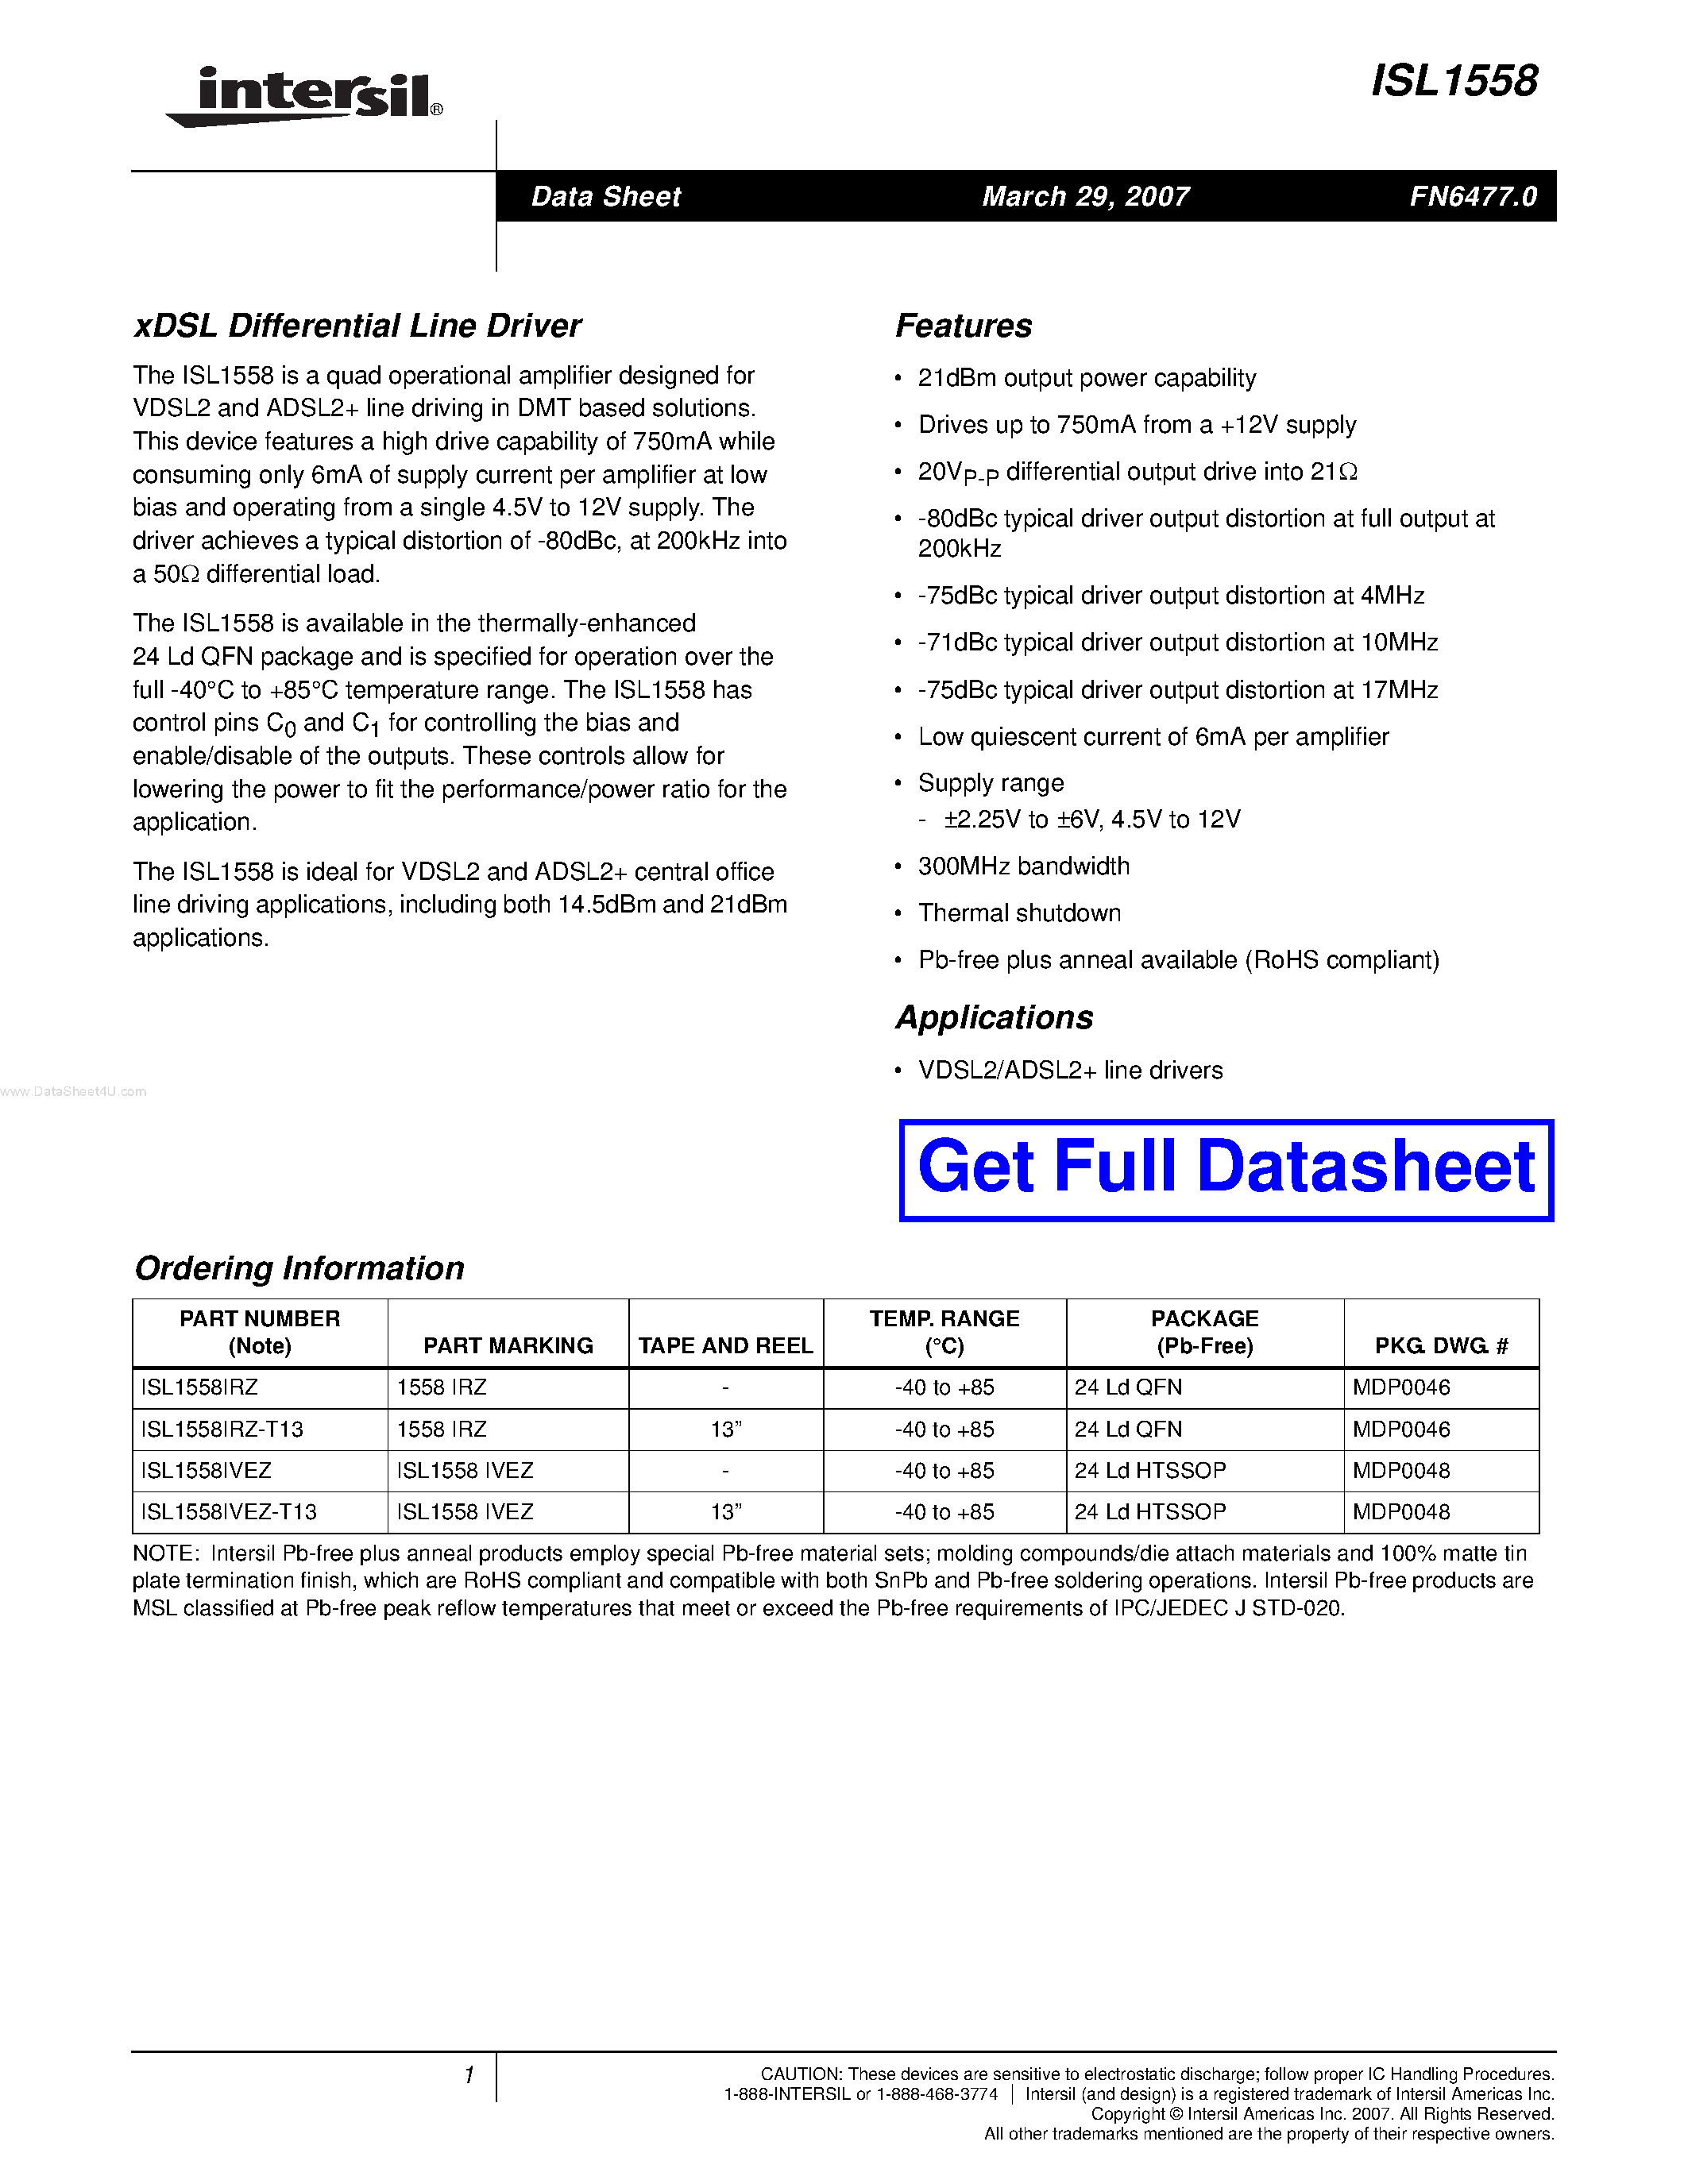 Datasheet ISL1558 - xDSL Differential Line Driver page 1